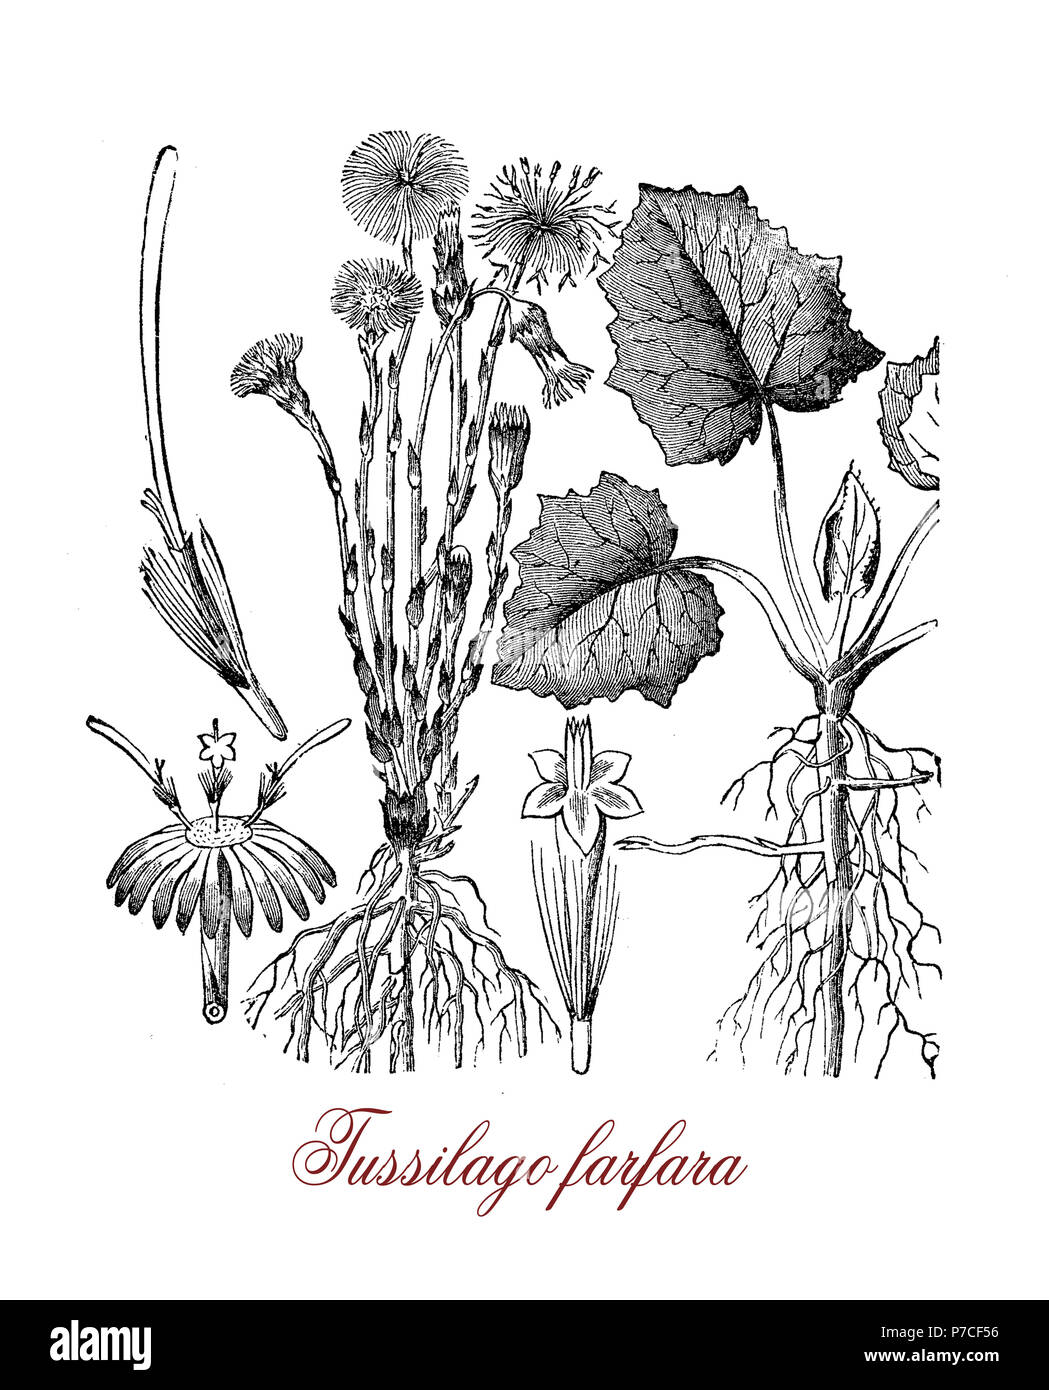 Botanical vintage engraving of tussilago farfara or coltsfoot, herbaceous plant with yellow flowers, used in traditional medicine but toxic for the liver. Stock Photo